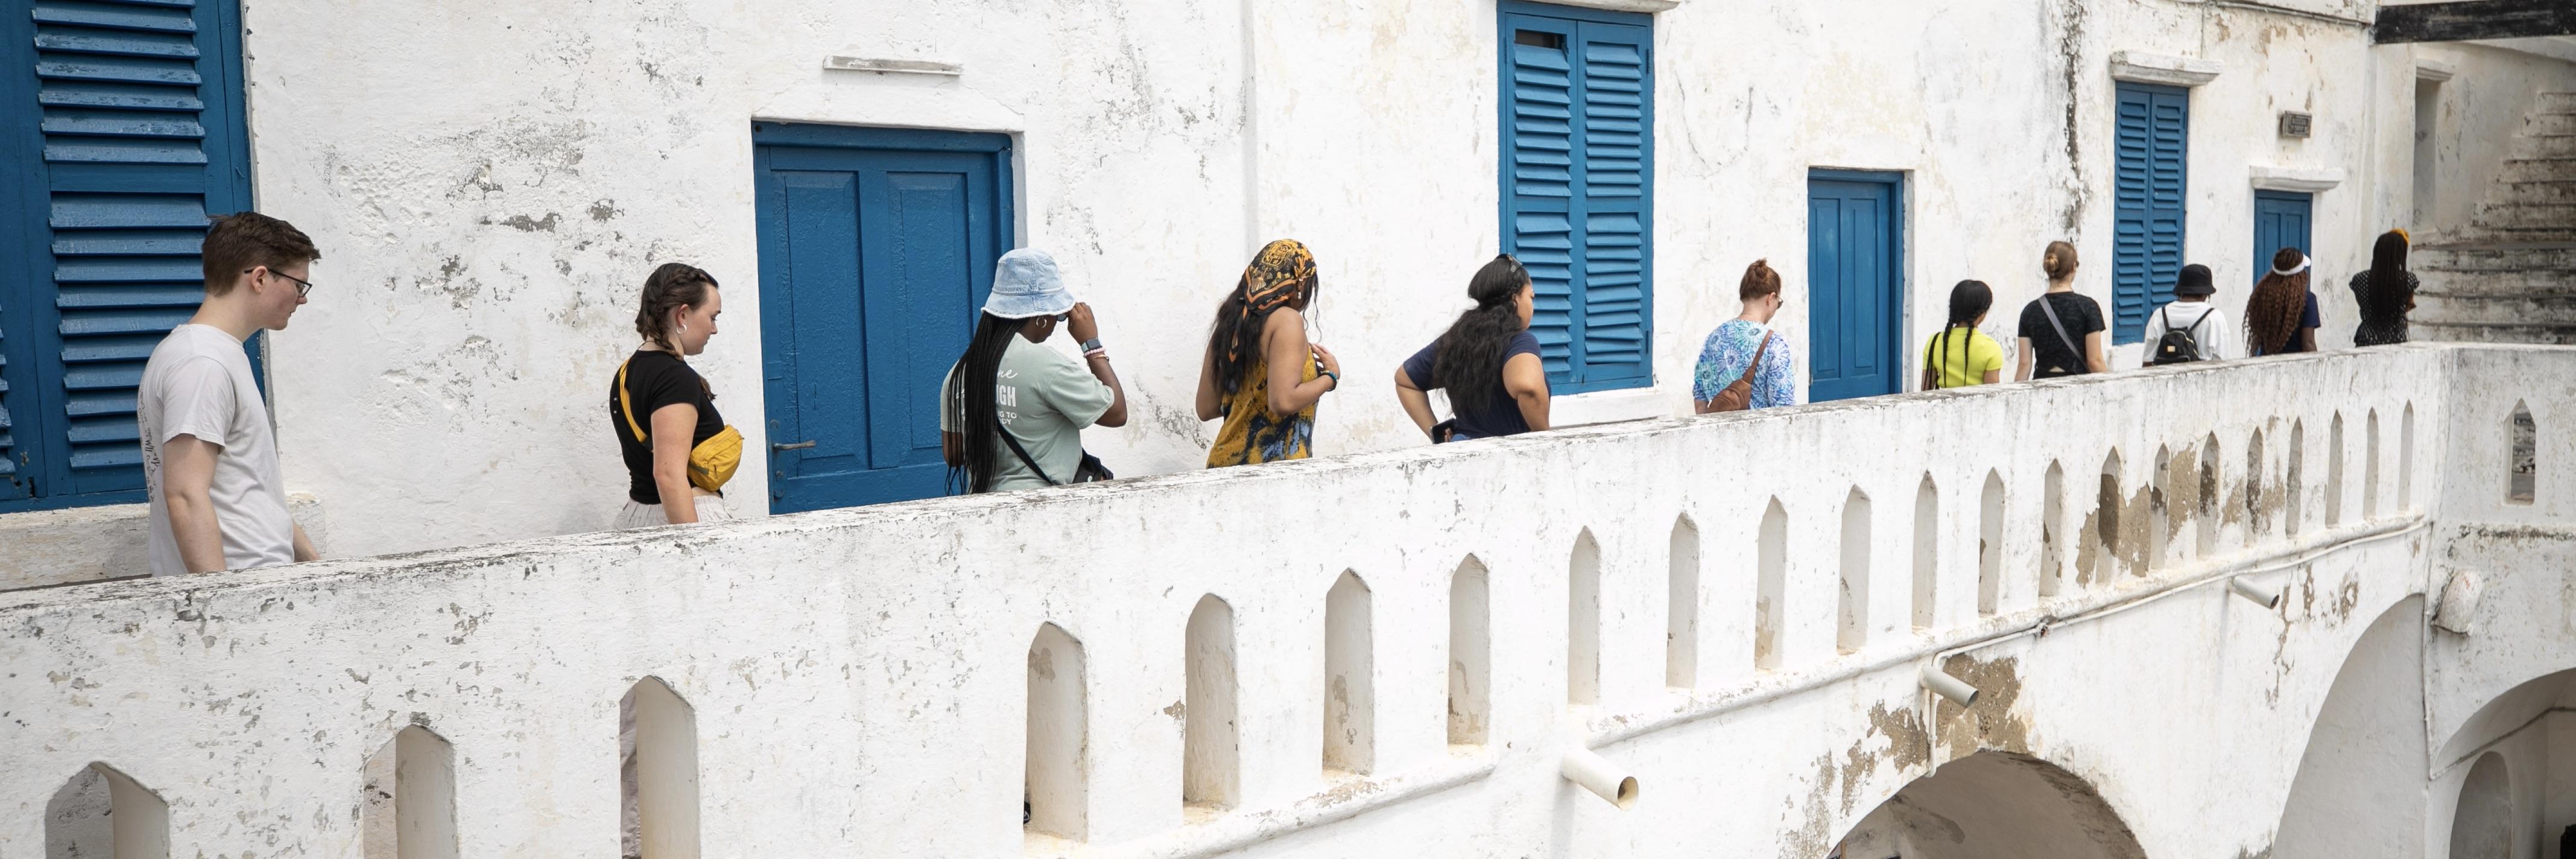 UMD students exploring Accra, Ghana. They walk along a white, stone balcony past vibrant bright doors and shutters. 